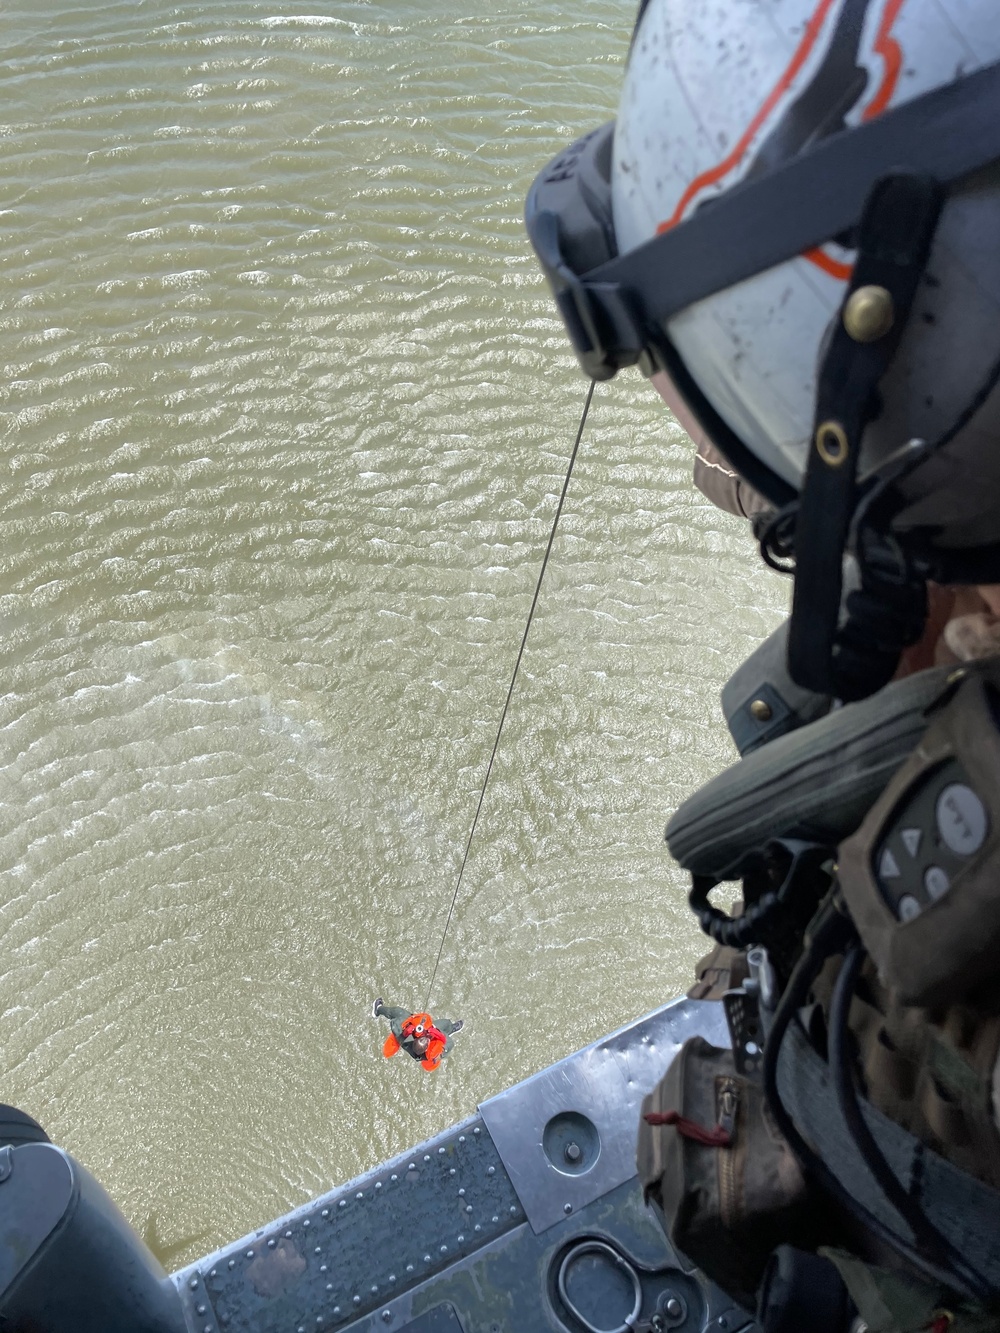 152nd Airlift Wing Conducts Joint Water Survival Training with Naval Air Station Search and Rescue Team